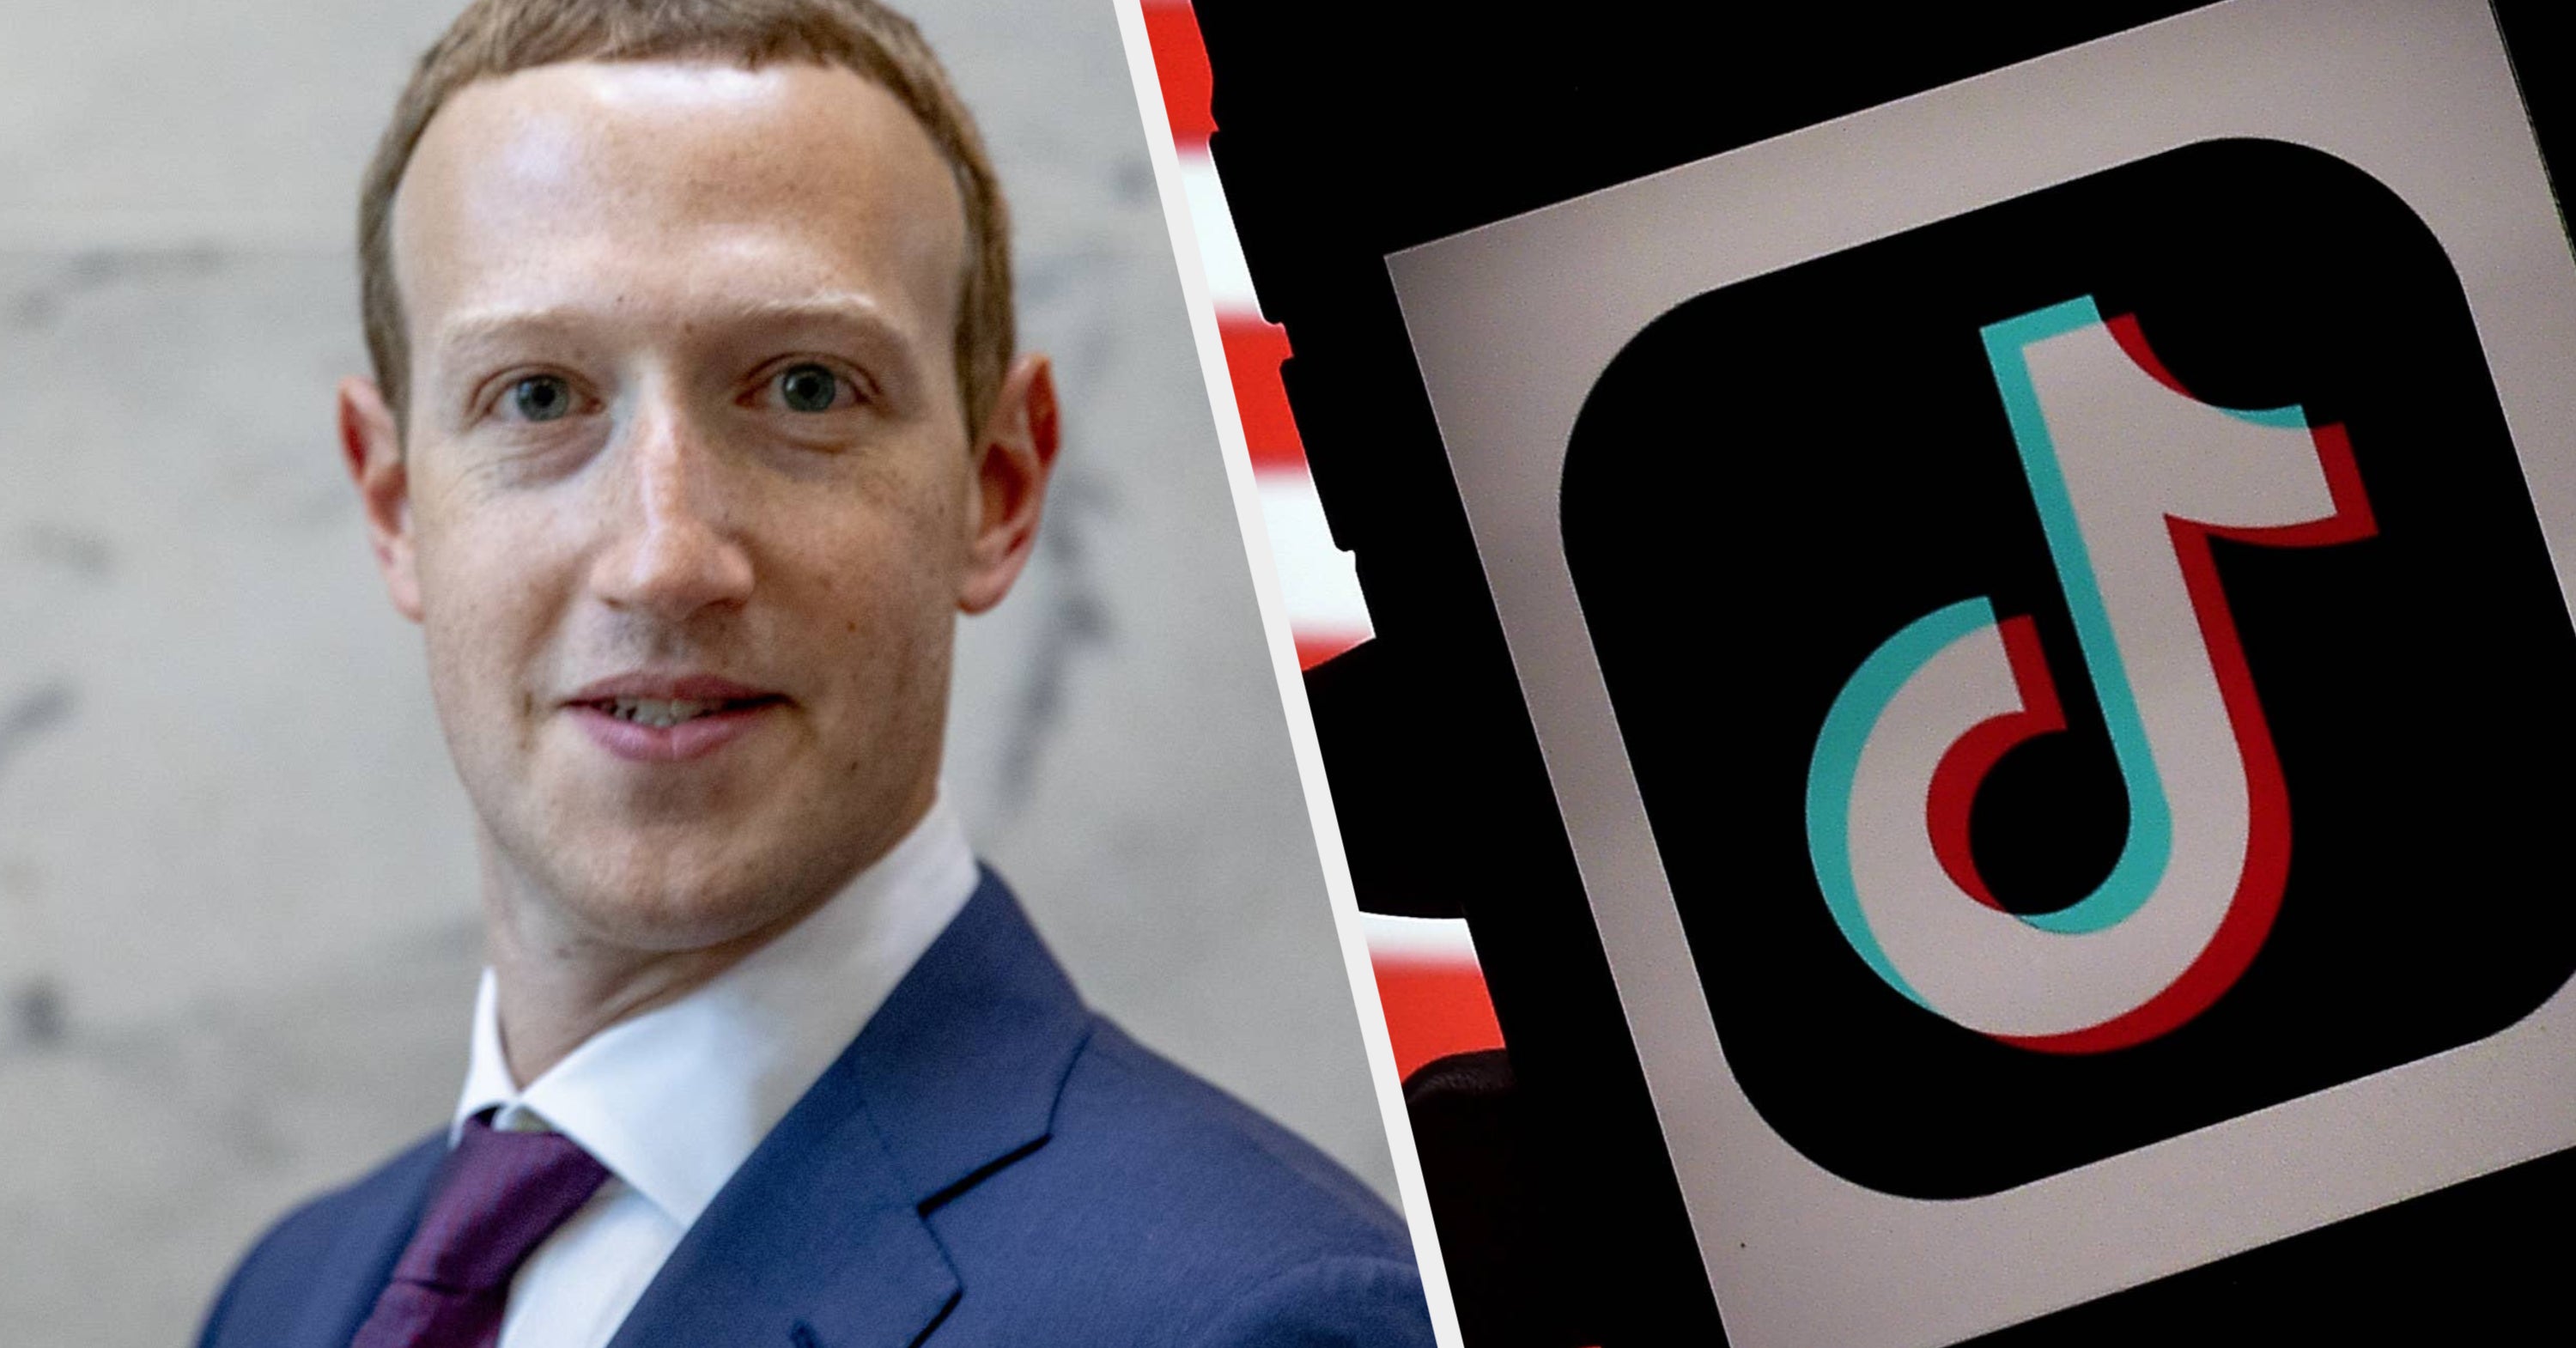 Techmeme Sources At All Hands Zuckerberg Says A Ban On Tiktok Would Set A Really Bad Long Term Precedent Arguing Any Benefit For Facebook Would Be Short Term Buzzfeed News - trump trolls hack roblox accounts to spread propaganda what to do tom s guide